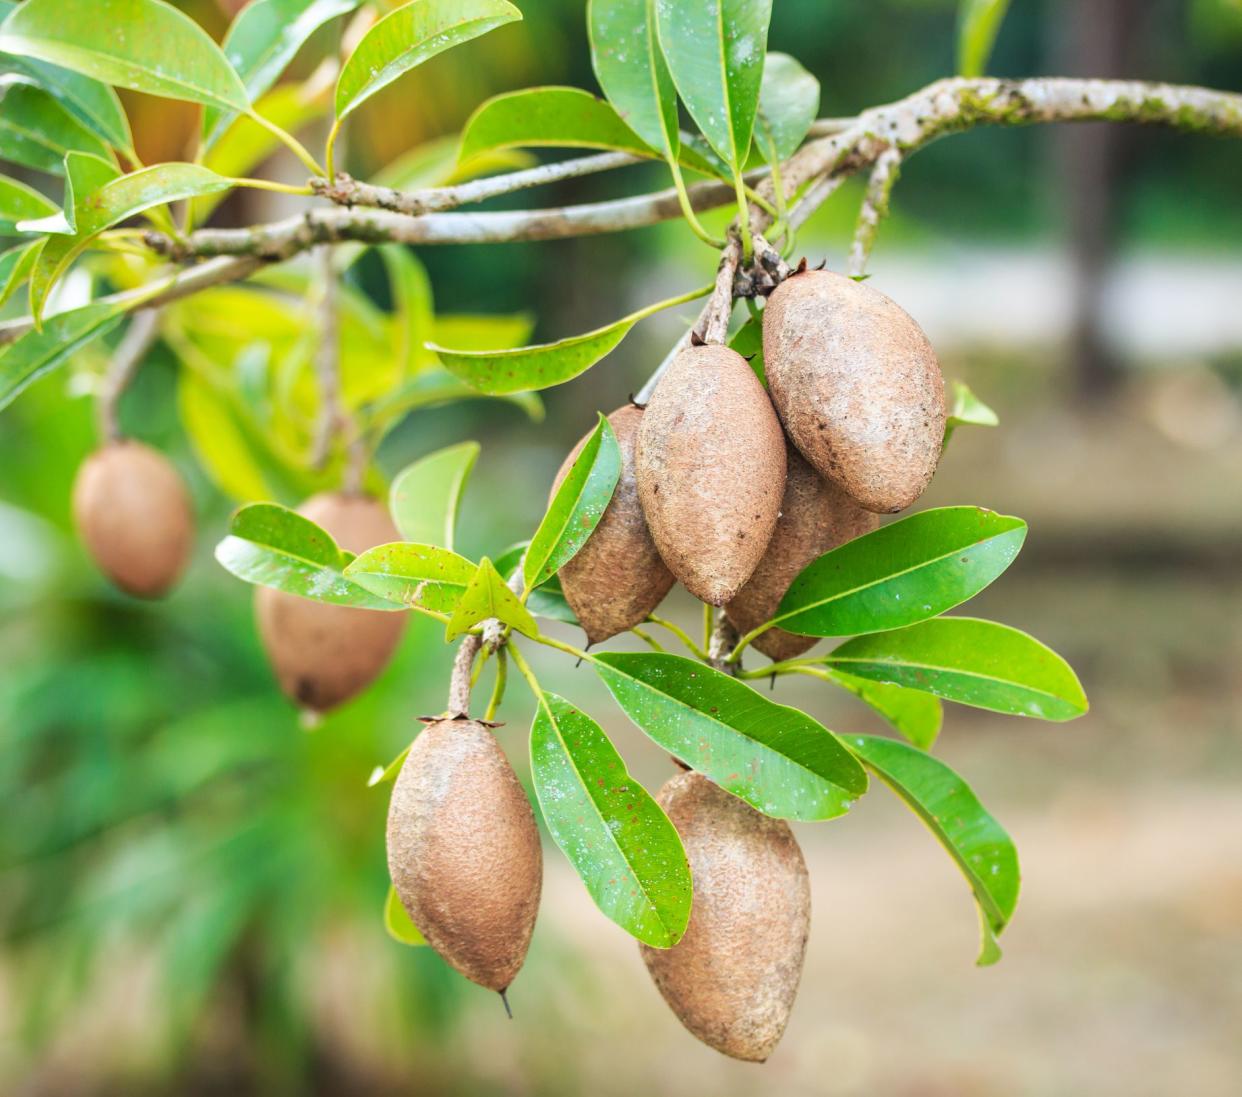 Sapodilla or Manilkara zapota can only survive in warm. The fruit has an exceptionally sweet and malty flavor.